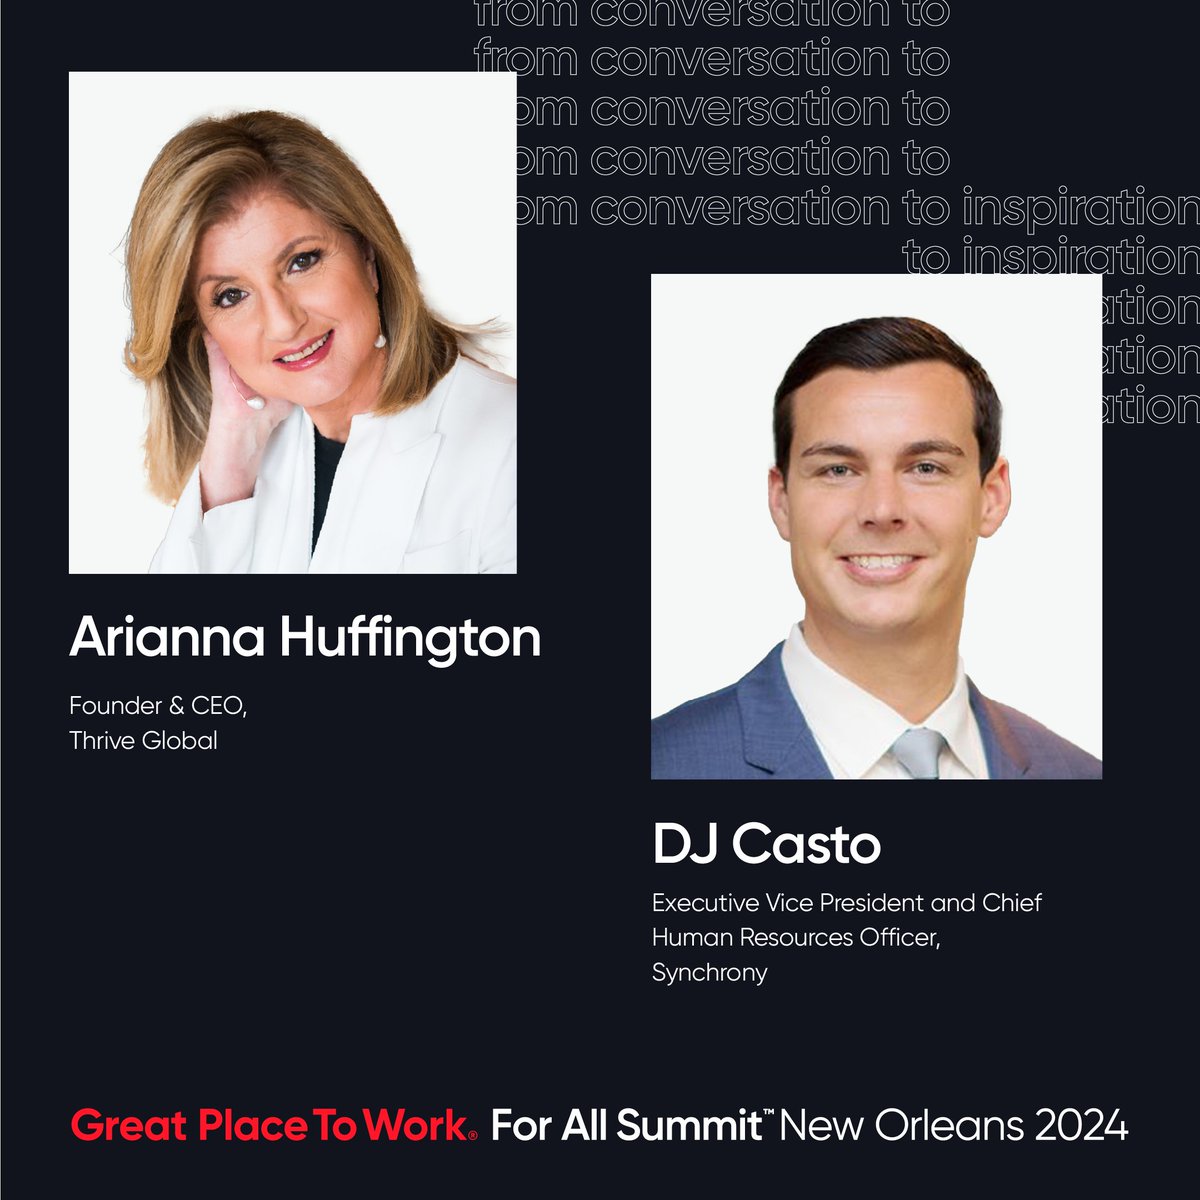 Boost employee engagement & retention through well-being! Join Arianna Huffington of @thrive and DJ Casto of @synchrony, moderated by Ellen McGirt, for a vital discussion on why investing in employee well-being is crucial for business success. bit.ly/4aKUQAc